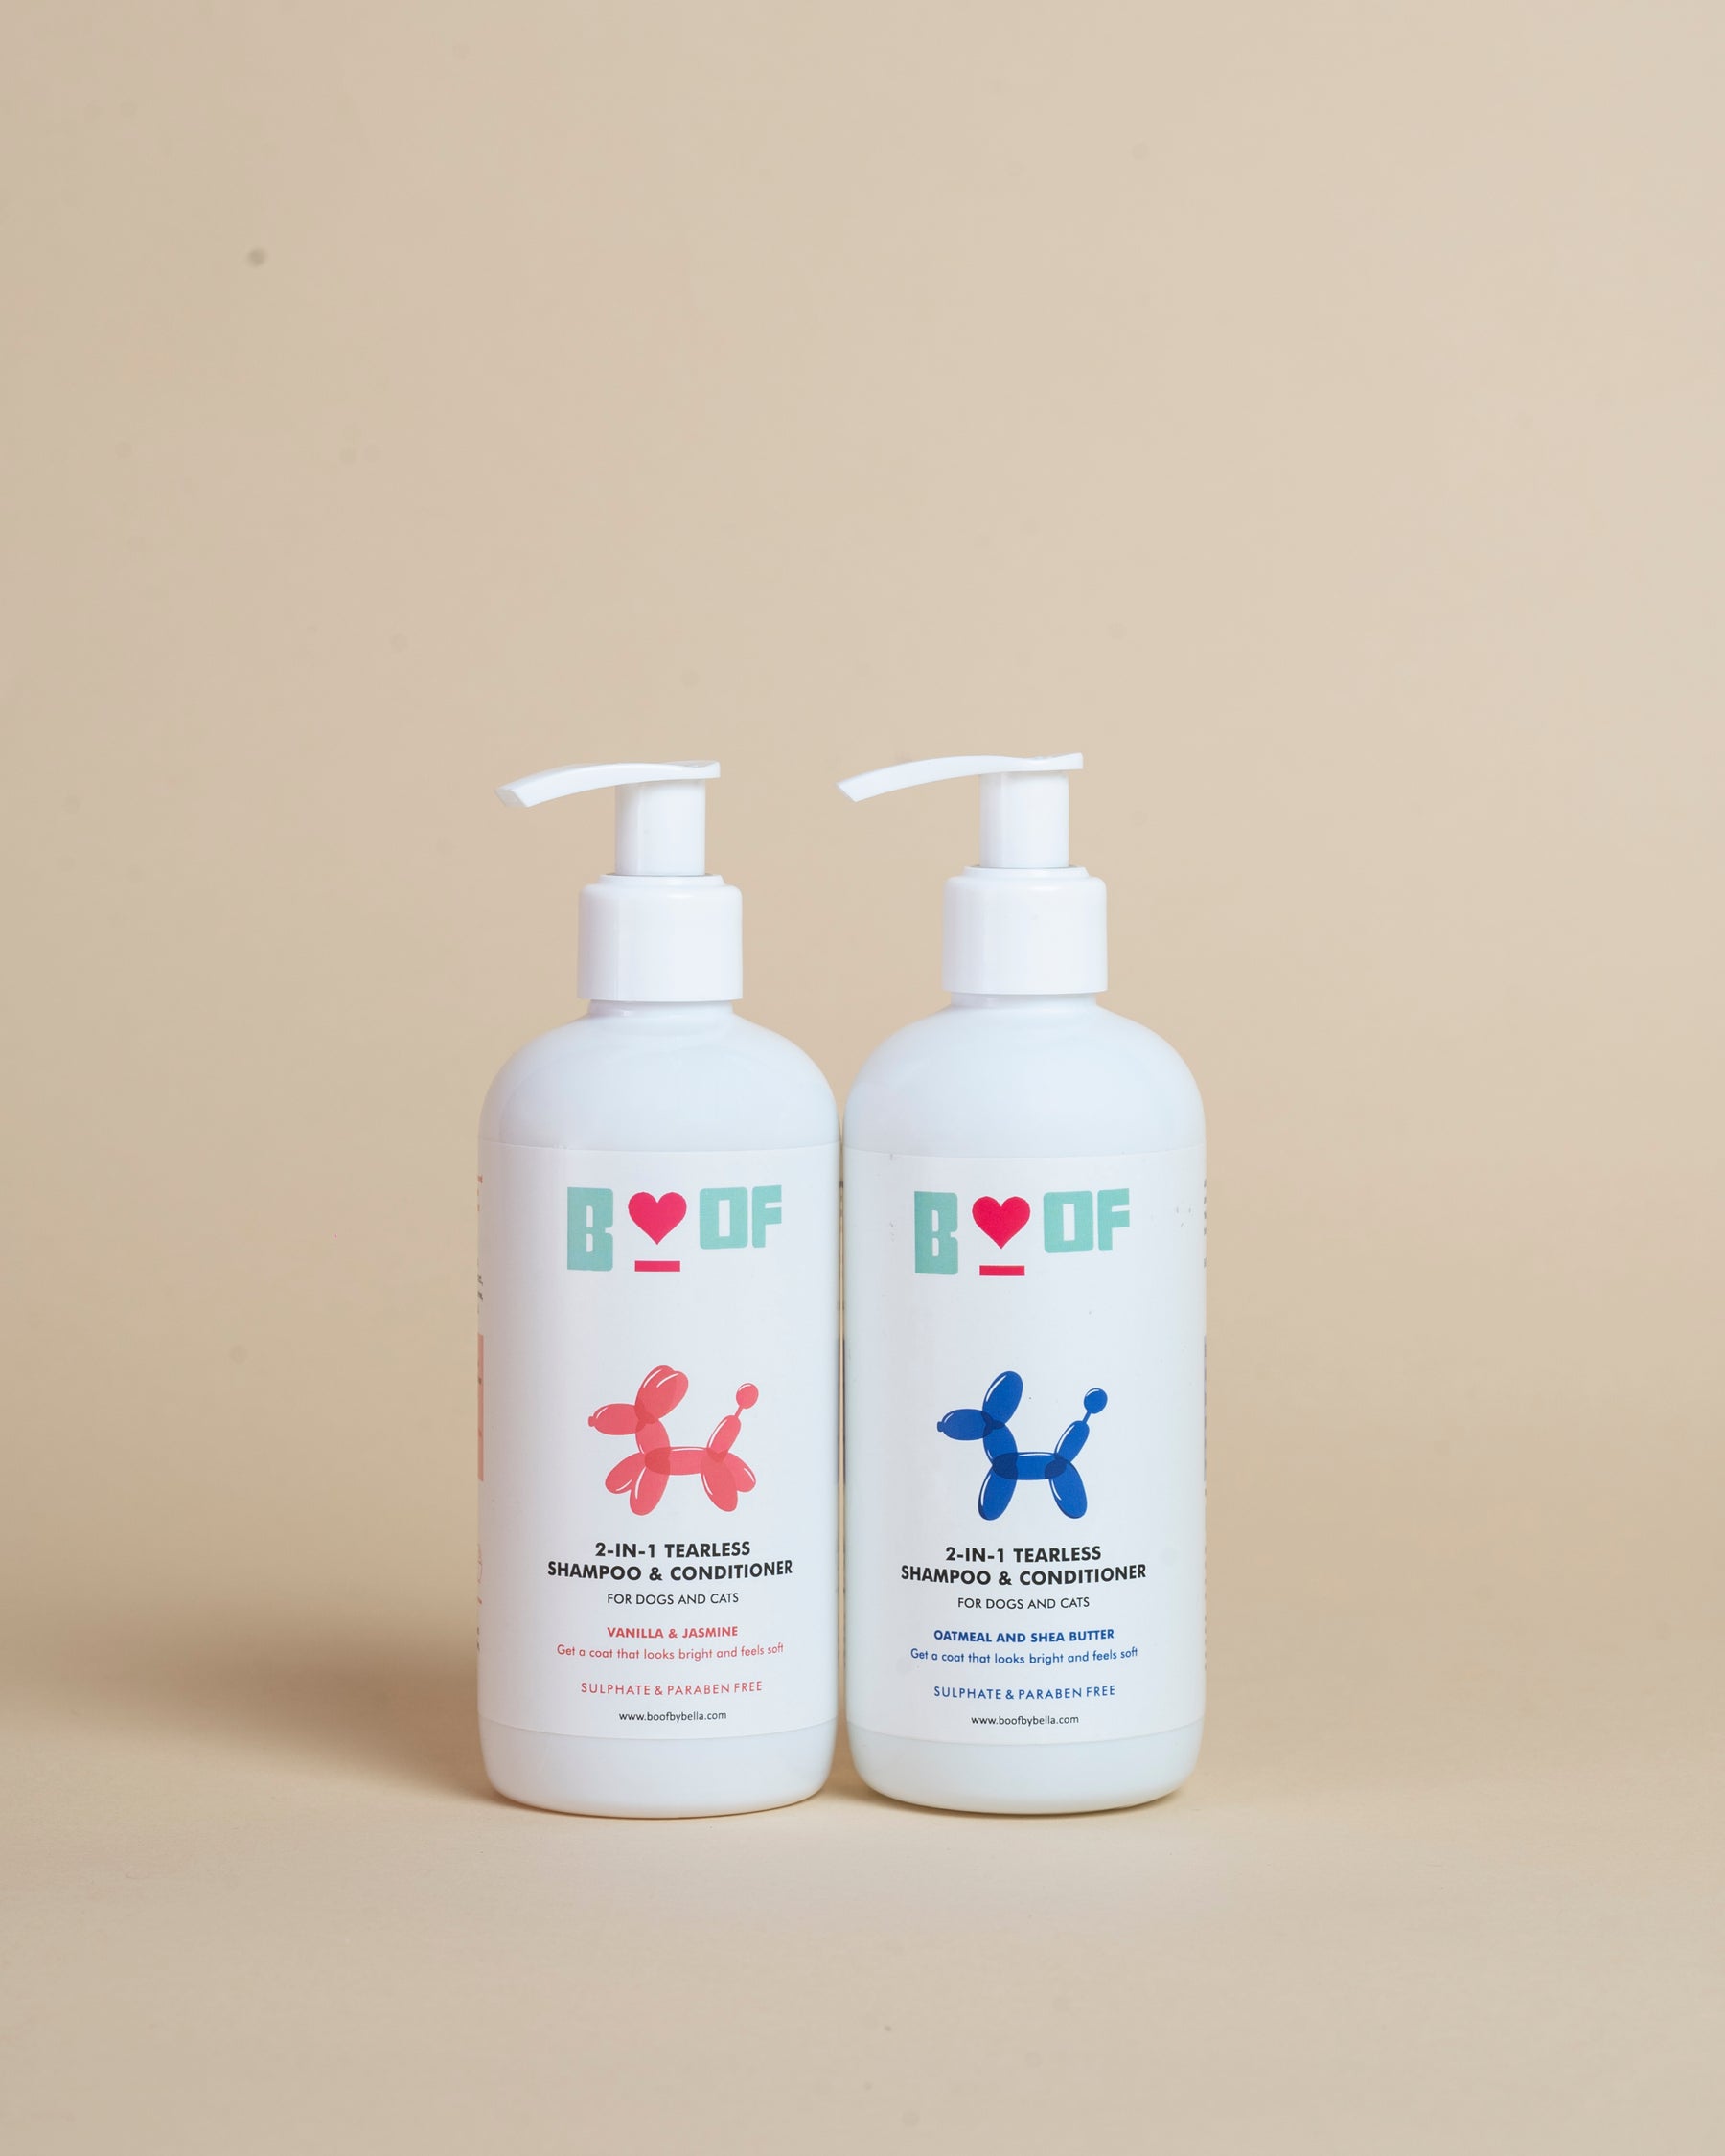 2-IN-1 TEARLESS SHAMPOO & CONDITIONER